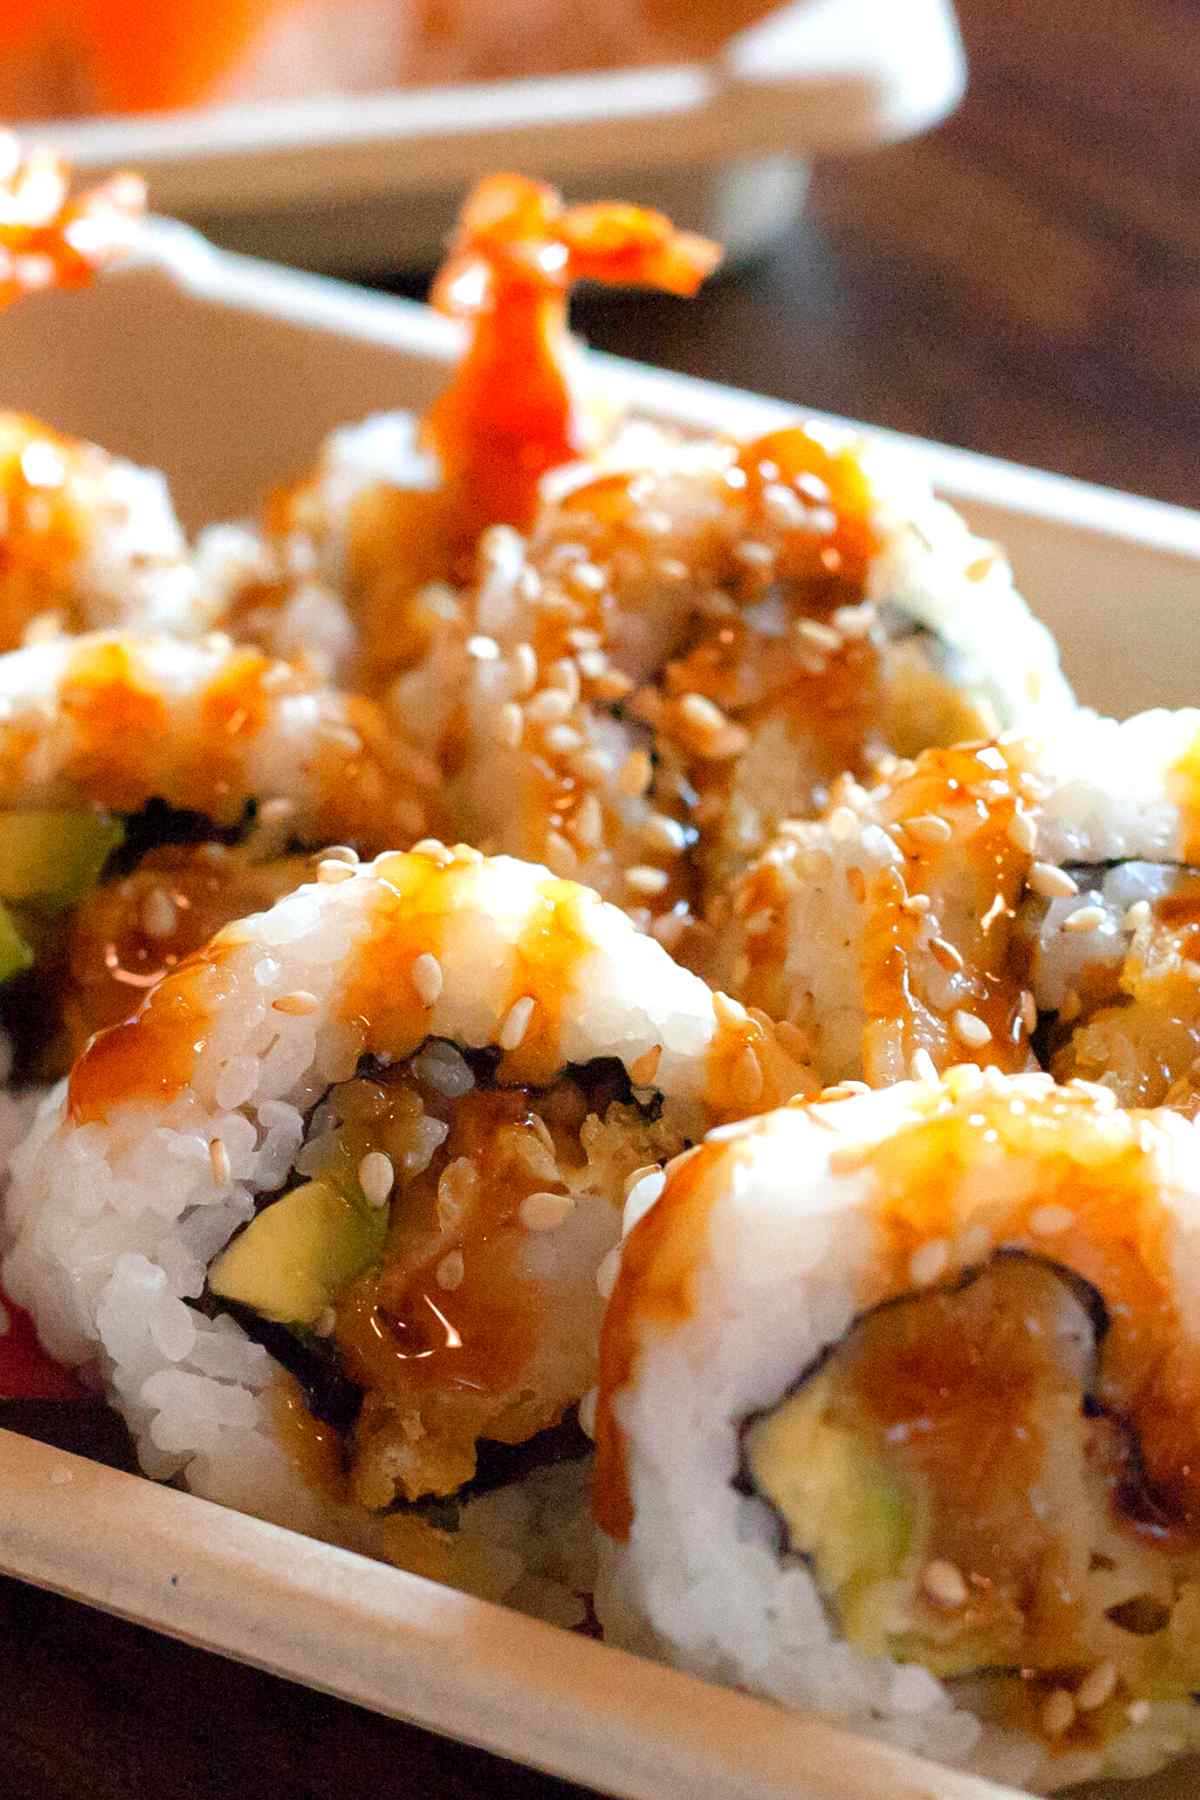 Get ready for an explosion of flavors with this easy-to-make sushi roll! A Dynamite Roll features crispy tempura shrimp, avocado, cucumber, mango and a delicious sauce that simply tantalizes your taste buds. A beautiful combination of sweet and savory flavors, we highly recommend serving this roll as a dinner party appetizer. However, we also understand if you decide to keep this delicious secret to yourself.